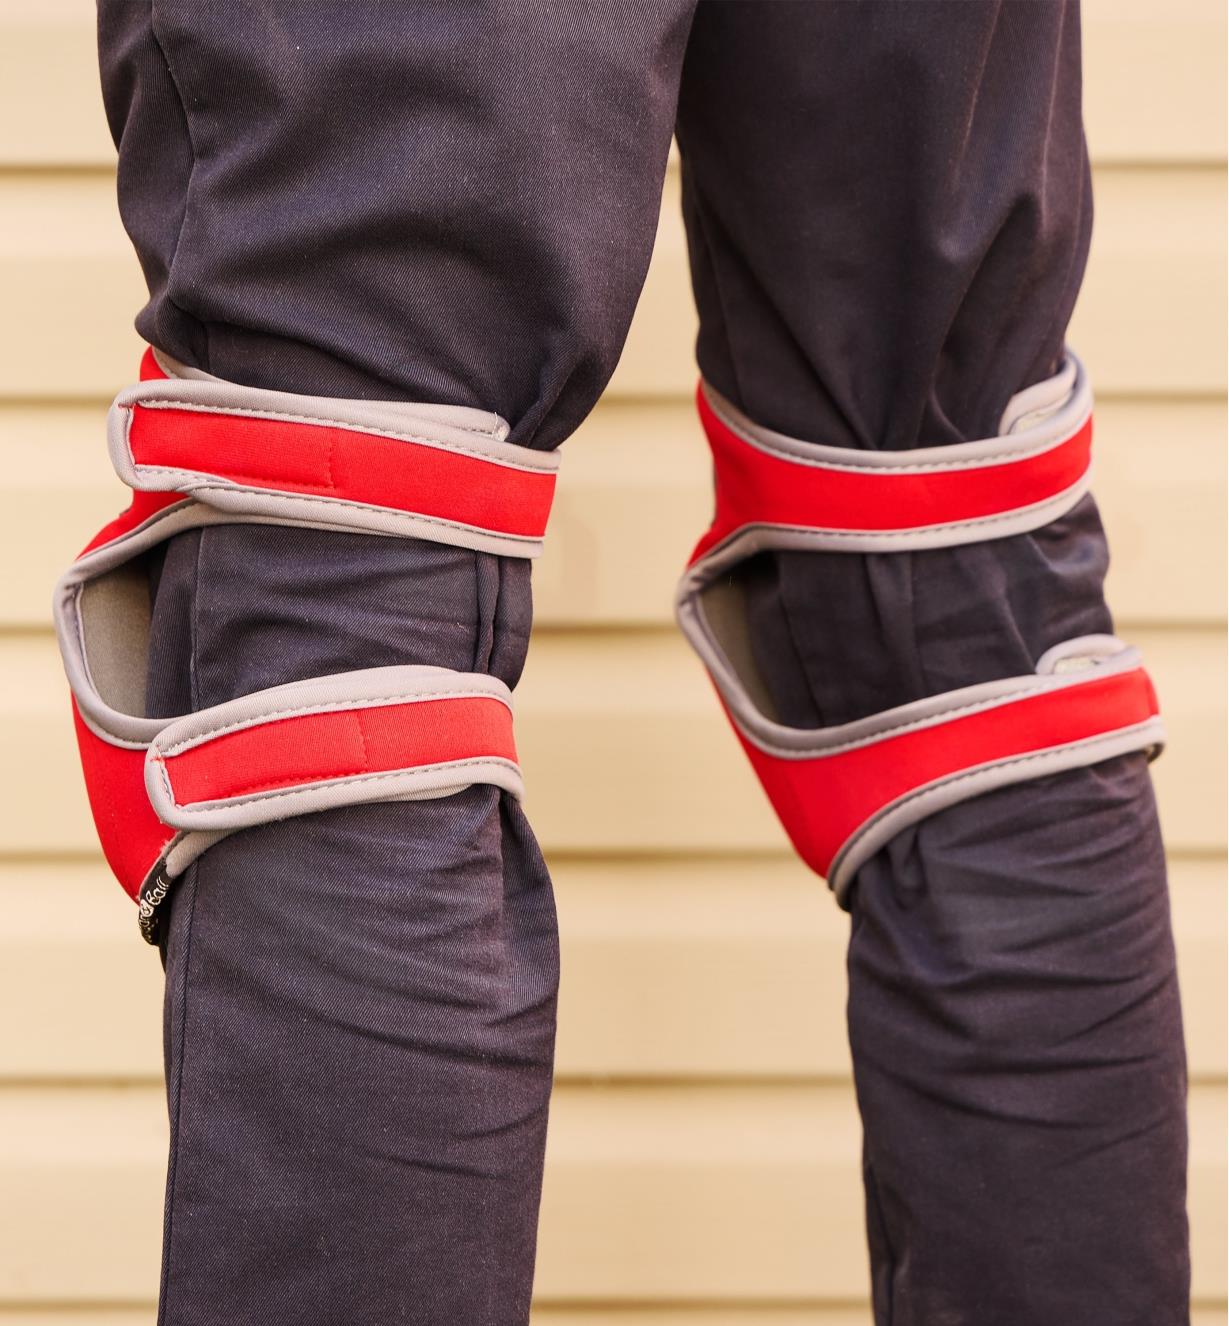 Rear view of a person wearing memory foam knee pads